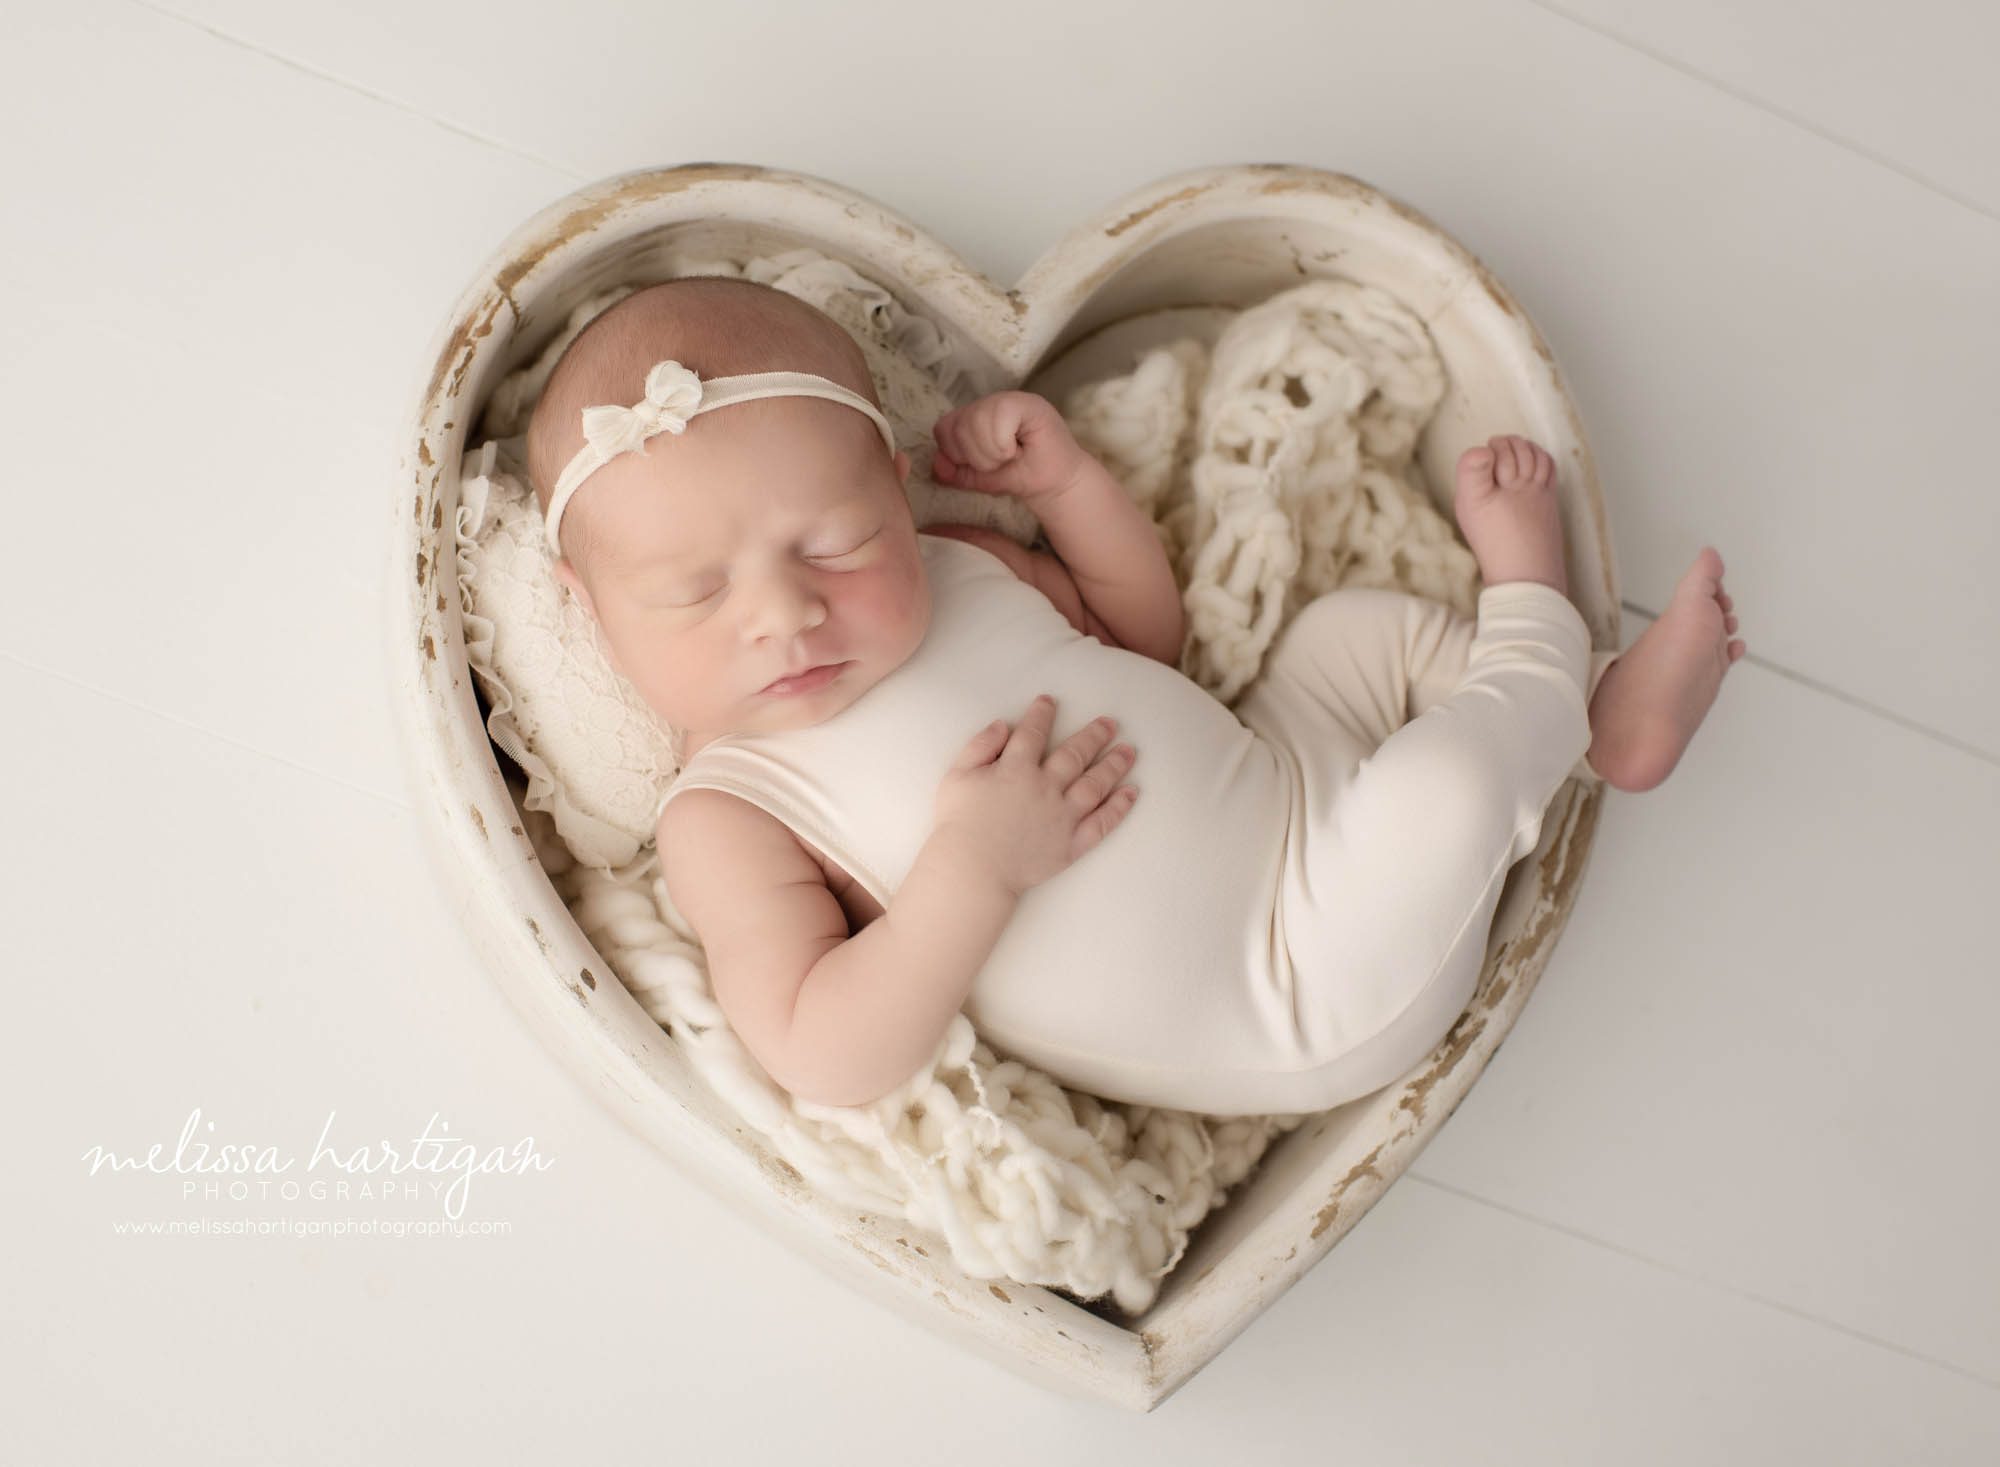 newborn baby girl posed in heart prop wearing white cream outfit with bow headband